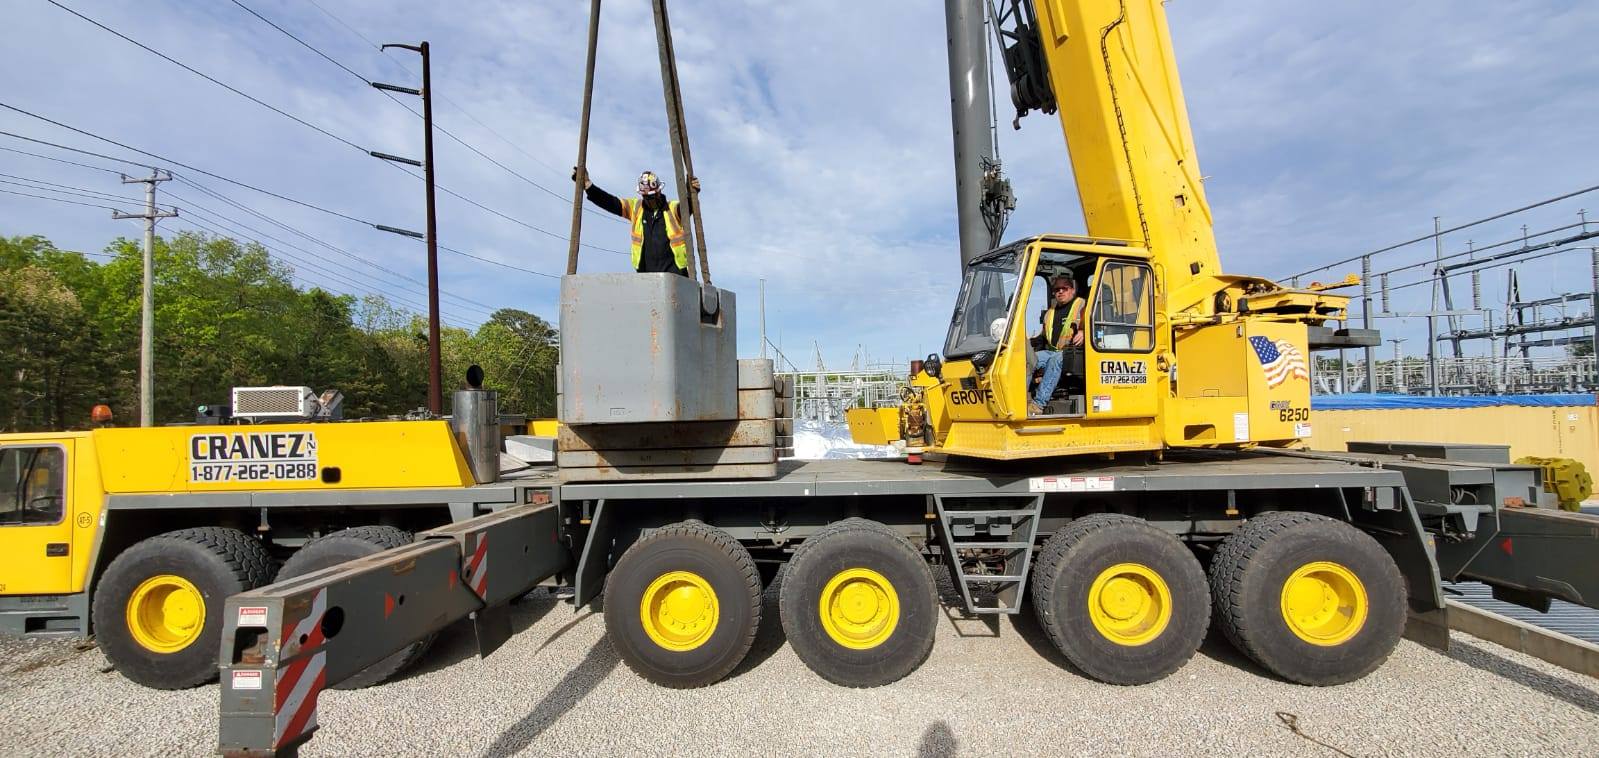 New Jersey Tri-State Crane Rental Services, Trucking and Transport, and Heavy Equipment Storage